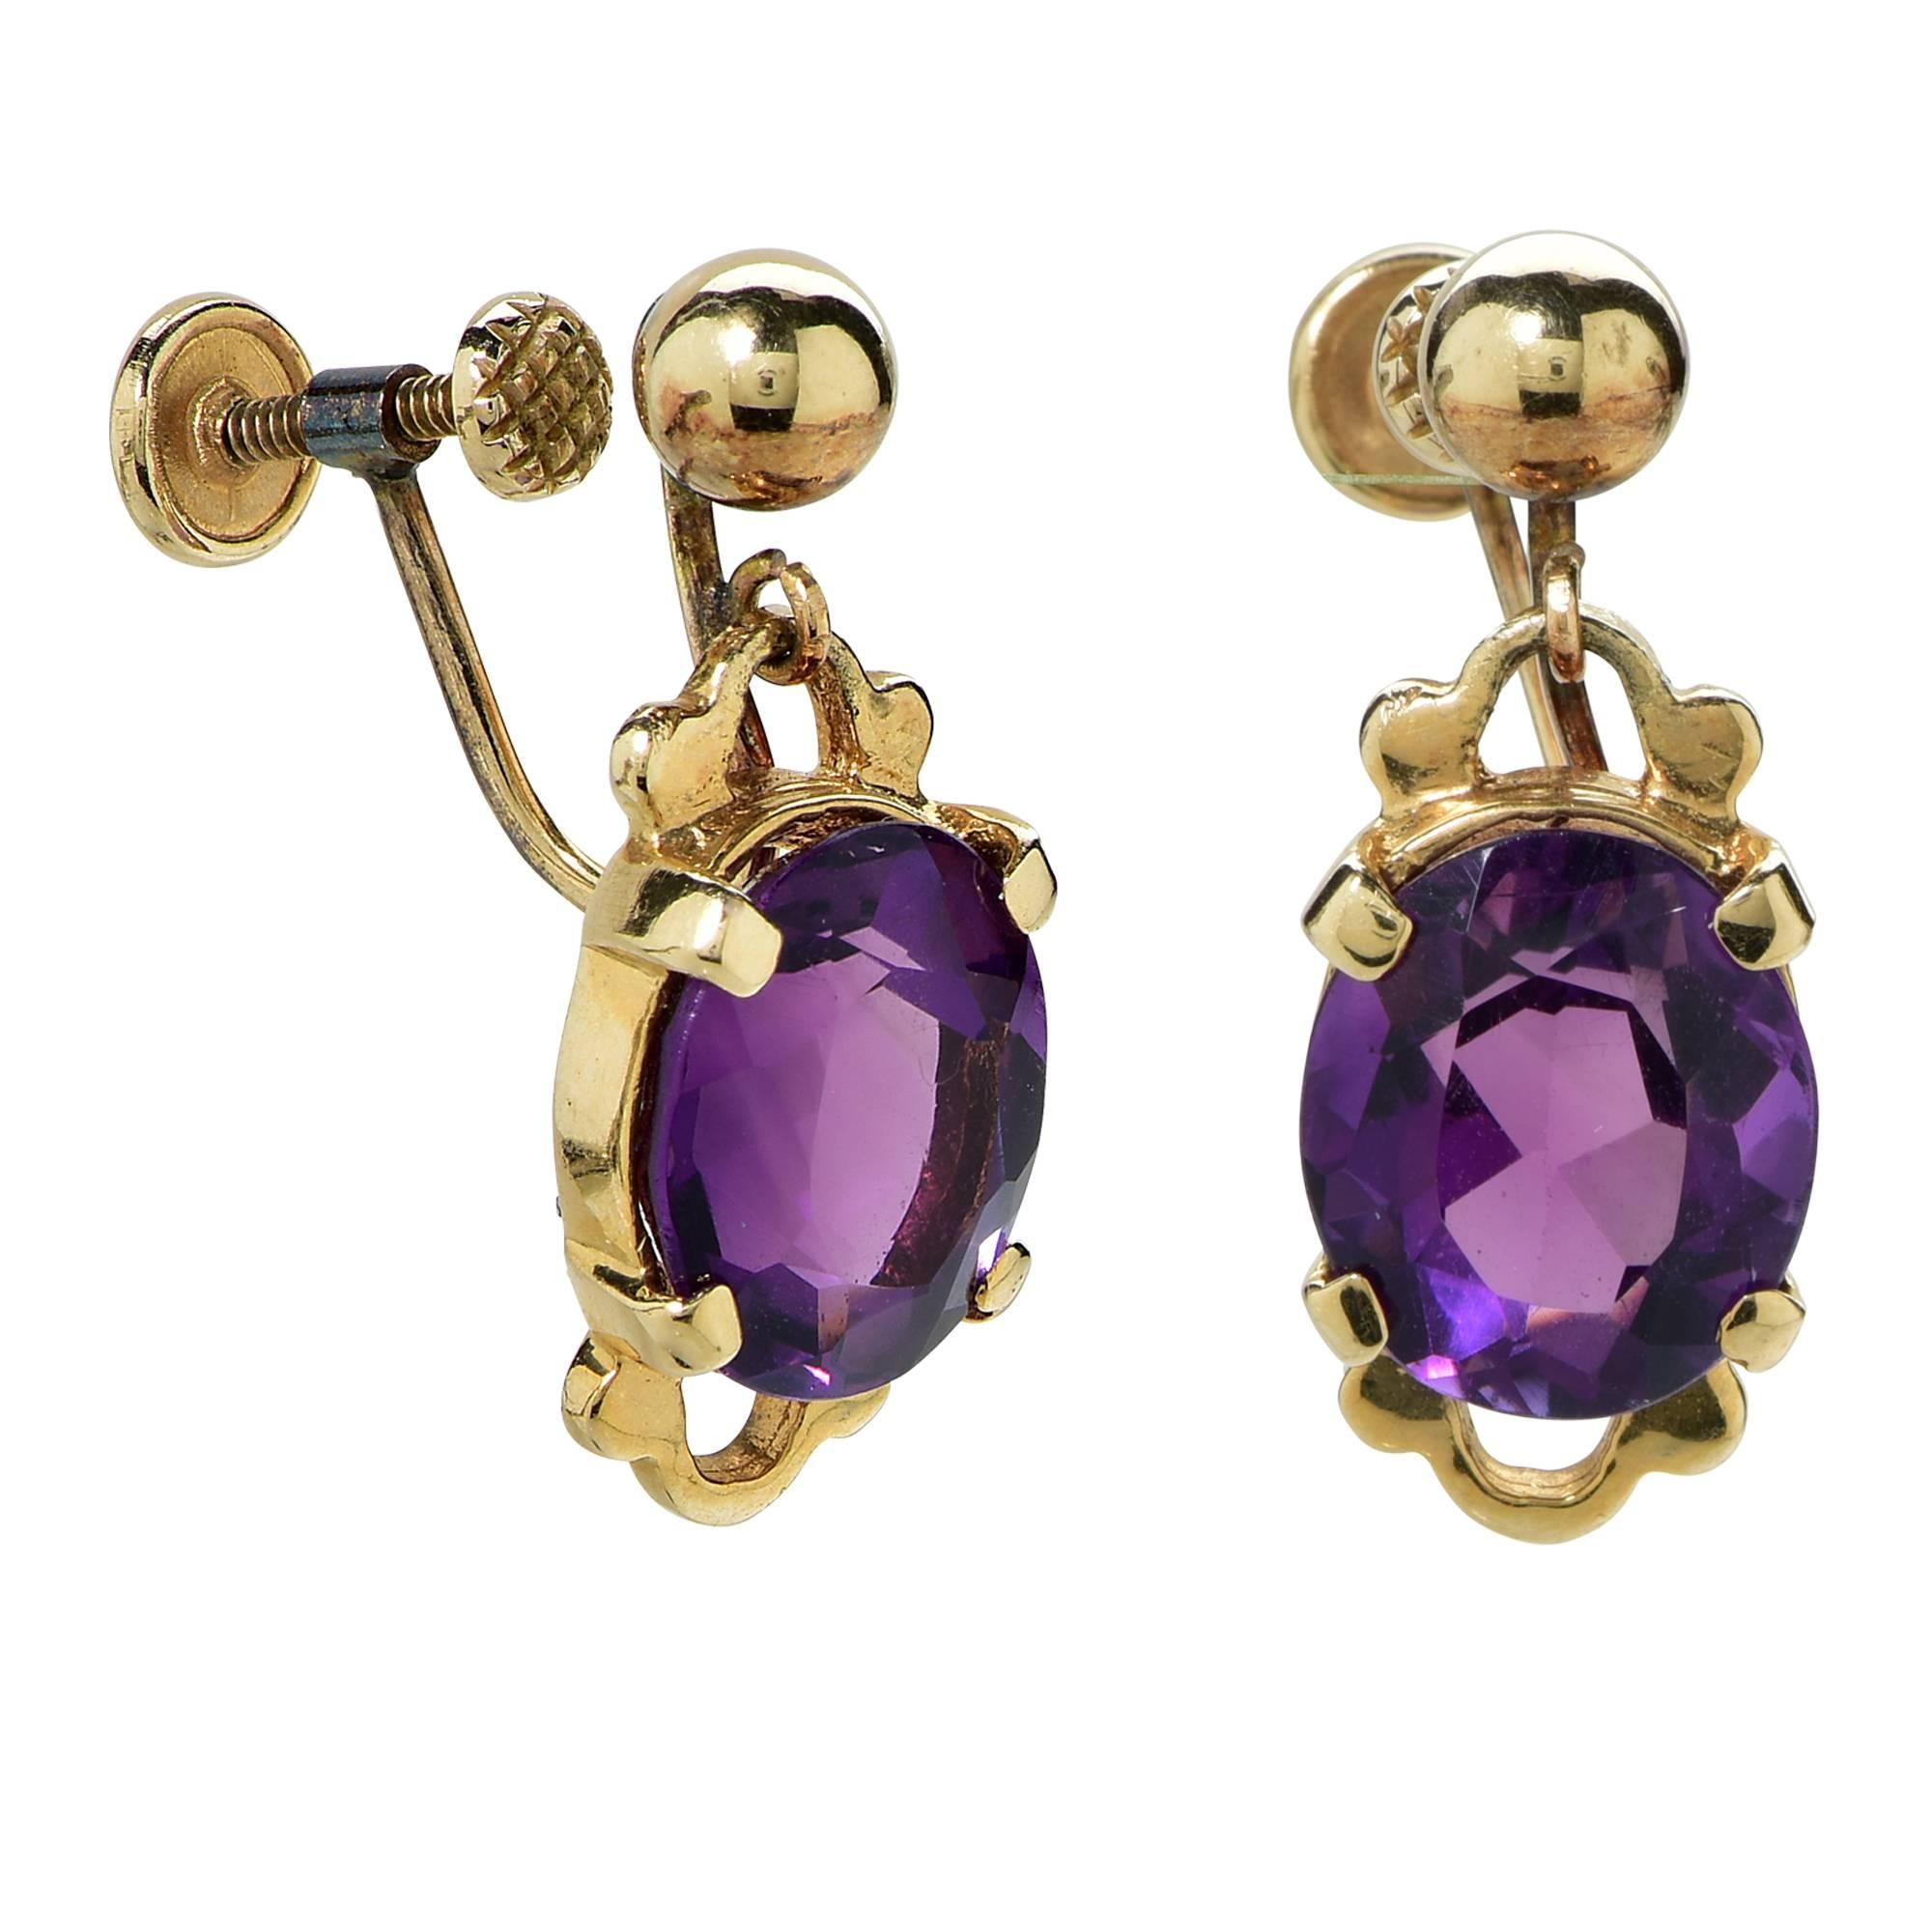 14k yellow gold earrings and necklace set featuring 4 oval cut amethyst weighing approximately 28cts total.

Metal weight: 17.96 grams

This amethyst earrings and necklace set is accompanied by a retail appraisal performed by a Graduate